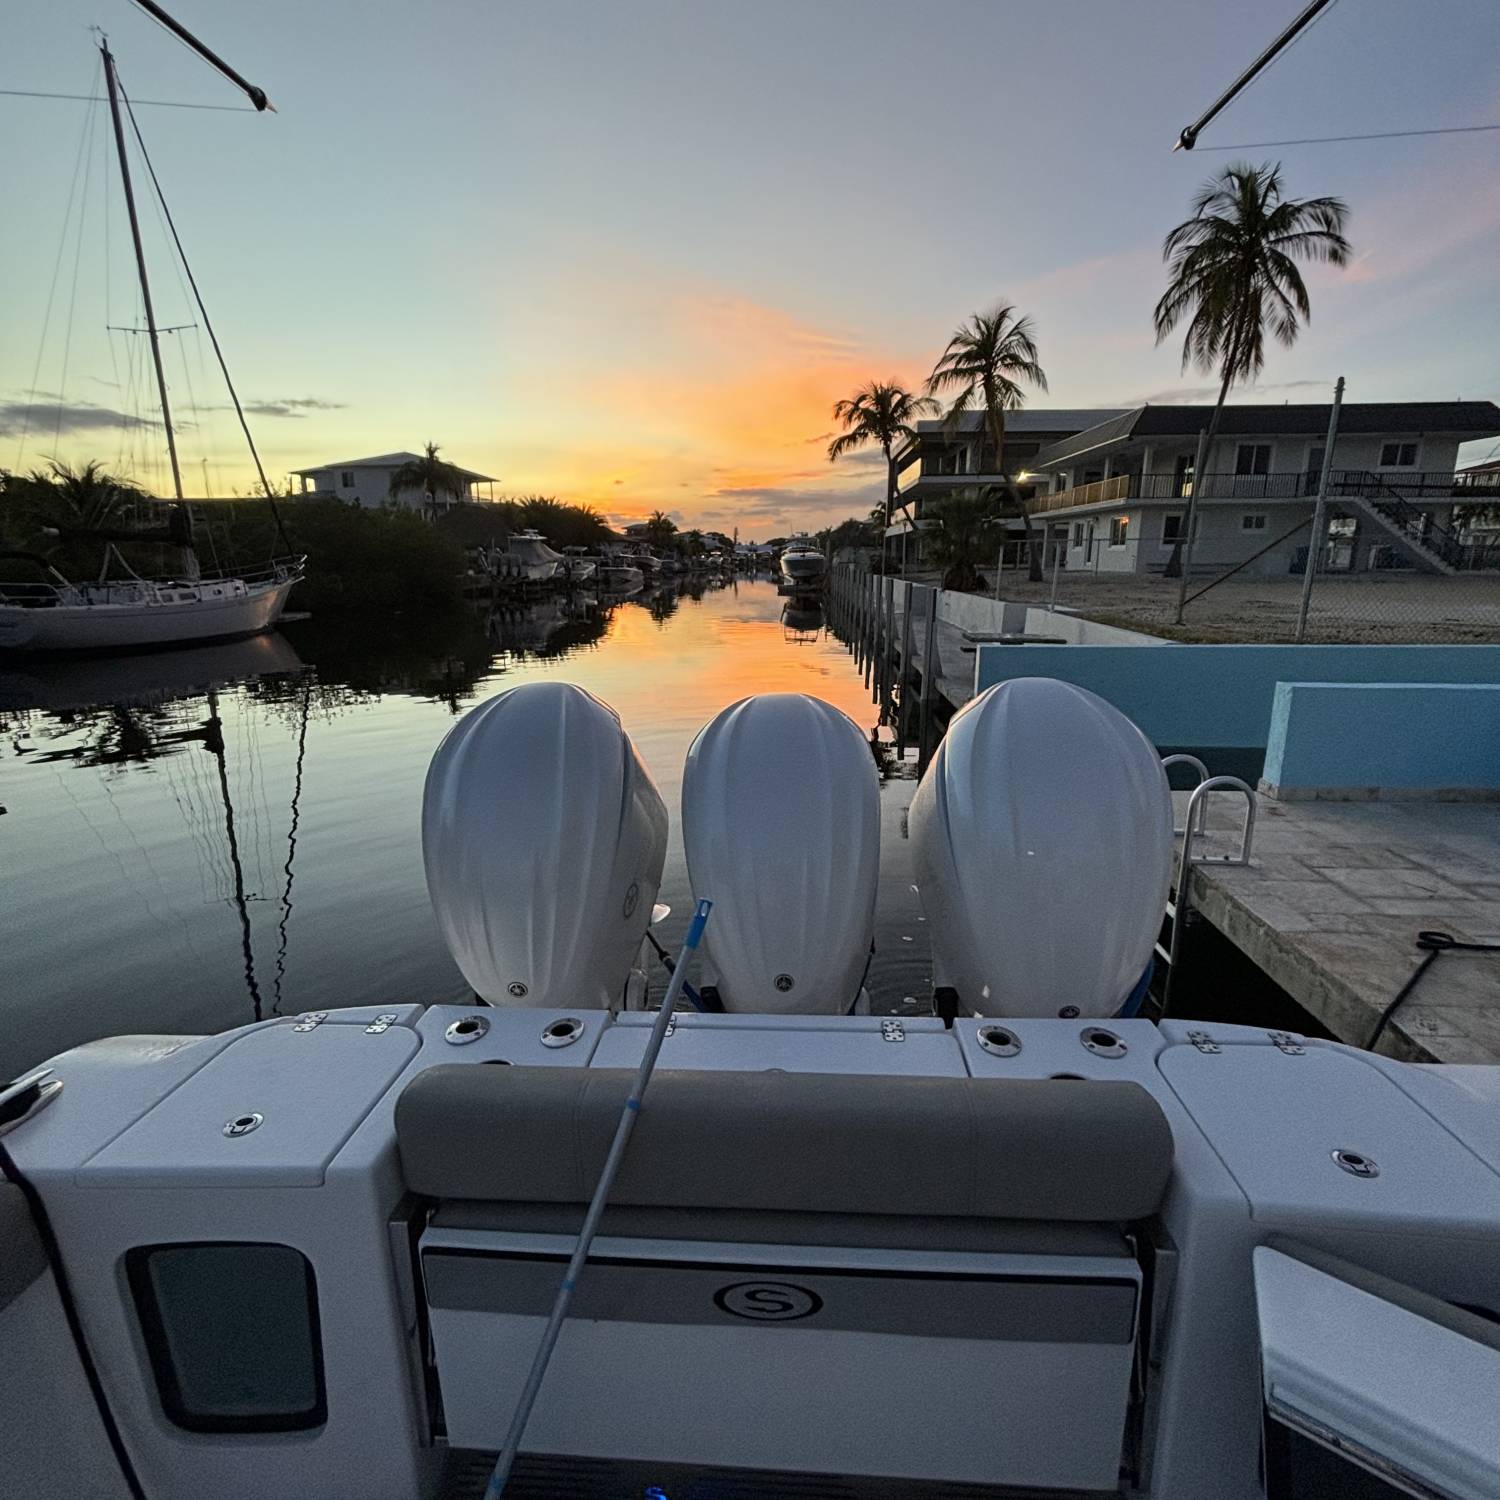 Title: Sunset and clean up - On board their Sportsman Open 352 Center Console - Location: Key largo. Participating in the Photo Contest #SportsmanDecember2023